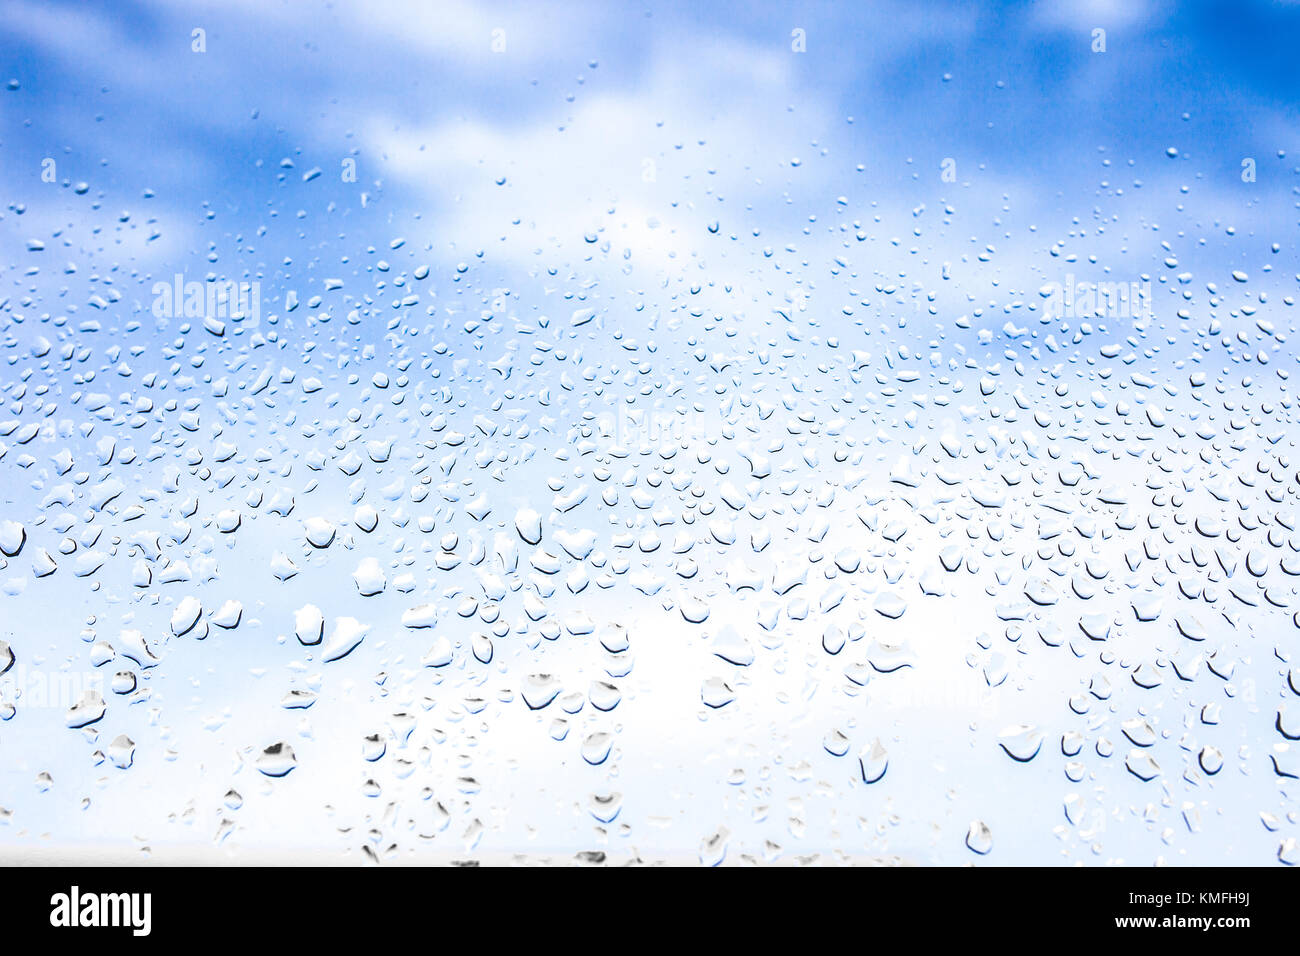 Rain drops on the glass in the background blurred blue cloudy sky. After raining concept Stock Photo